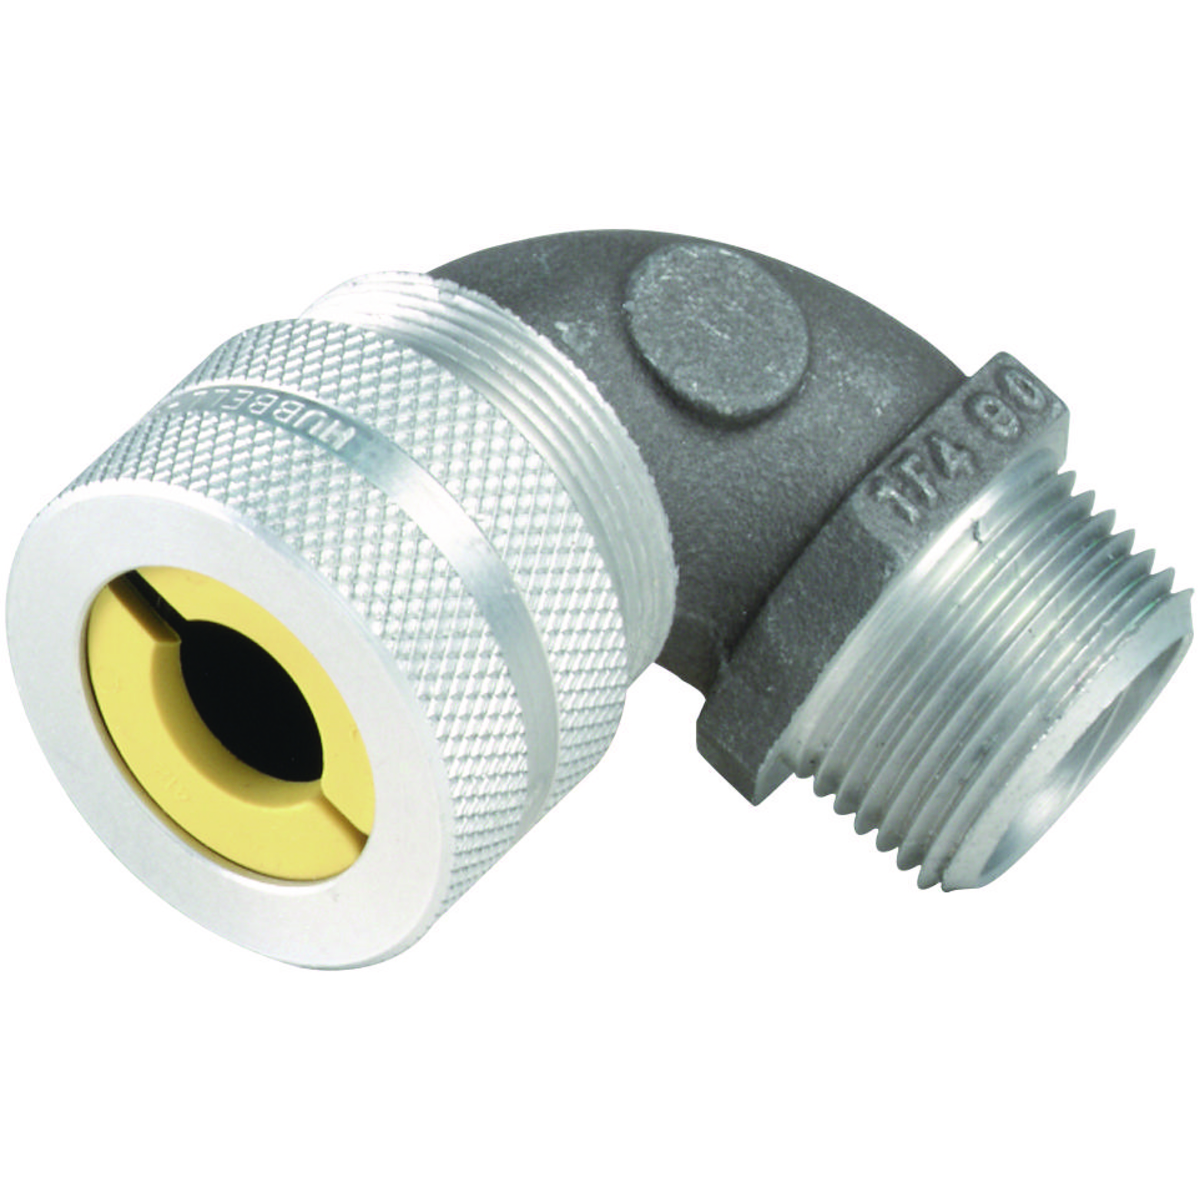 Z SERIES - ALUMINUM INCREASED SAFETY 90-DEGREE CORD CONNECTOR - CORDRANGE 1.250 TO 1.375 - HUB SIZE 1-1/2 INCH NPT